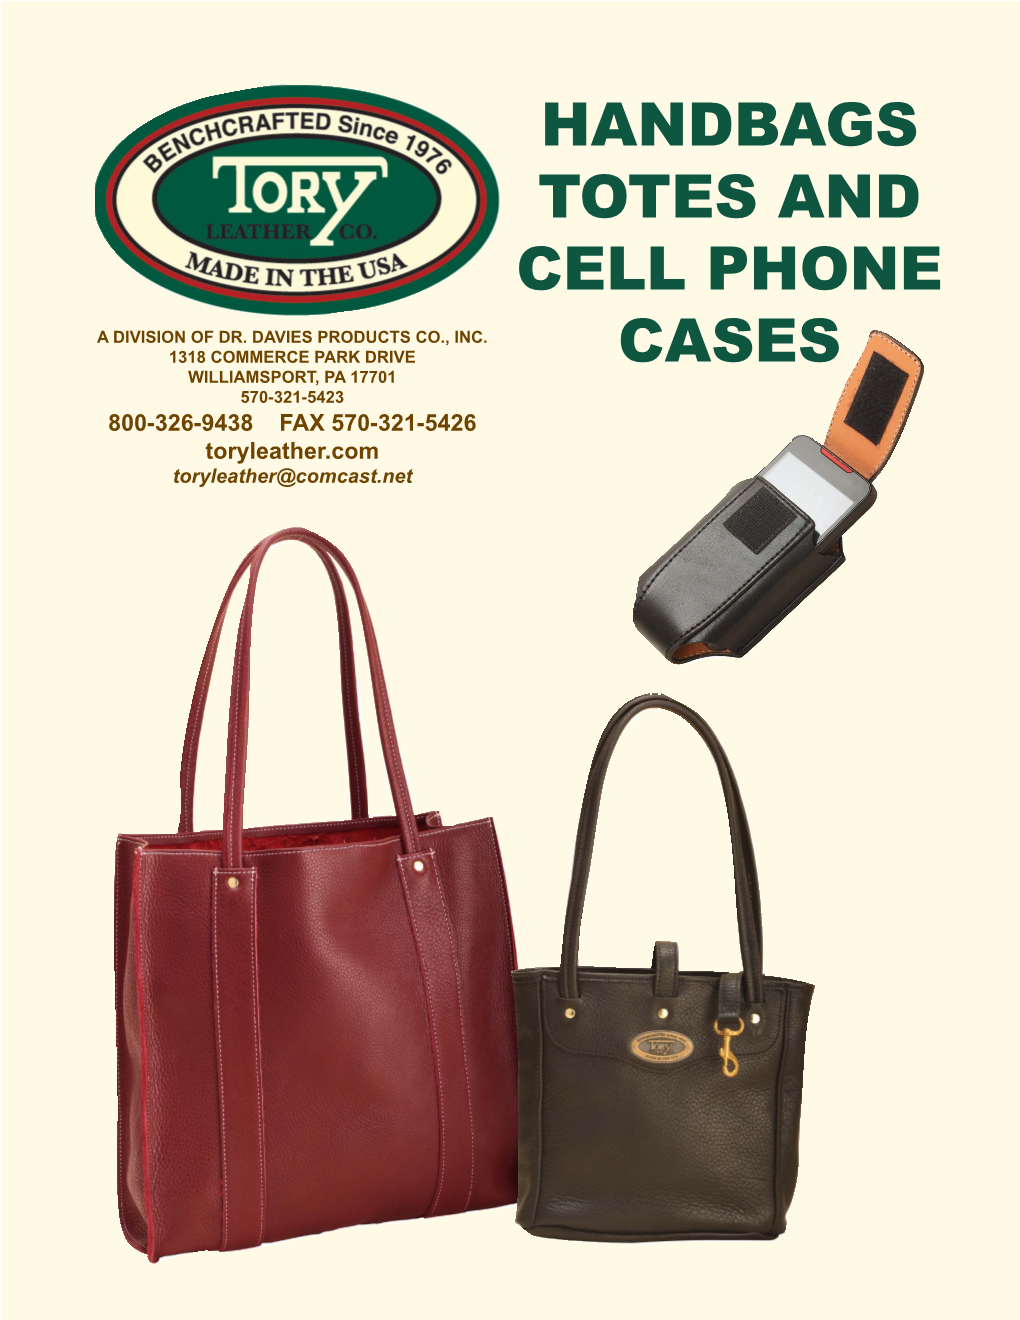 Handbags Totes and Cell Phone Cases